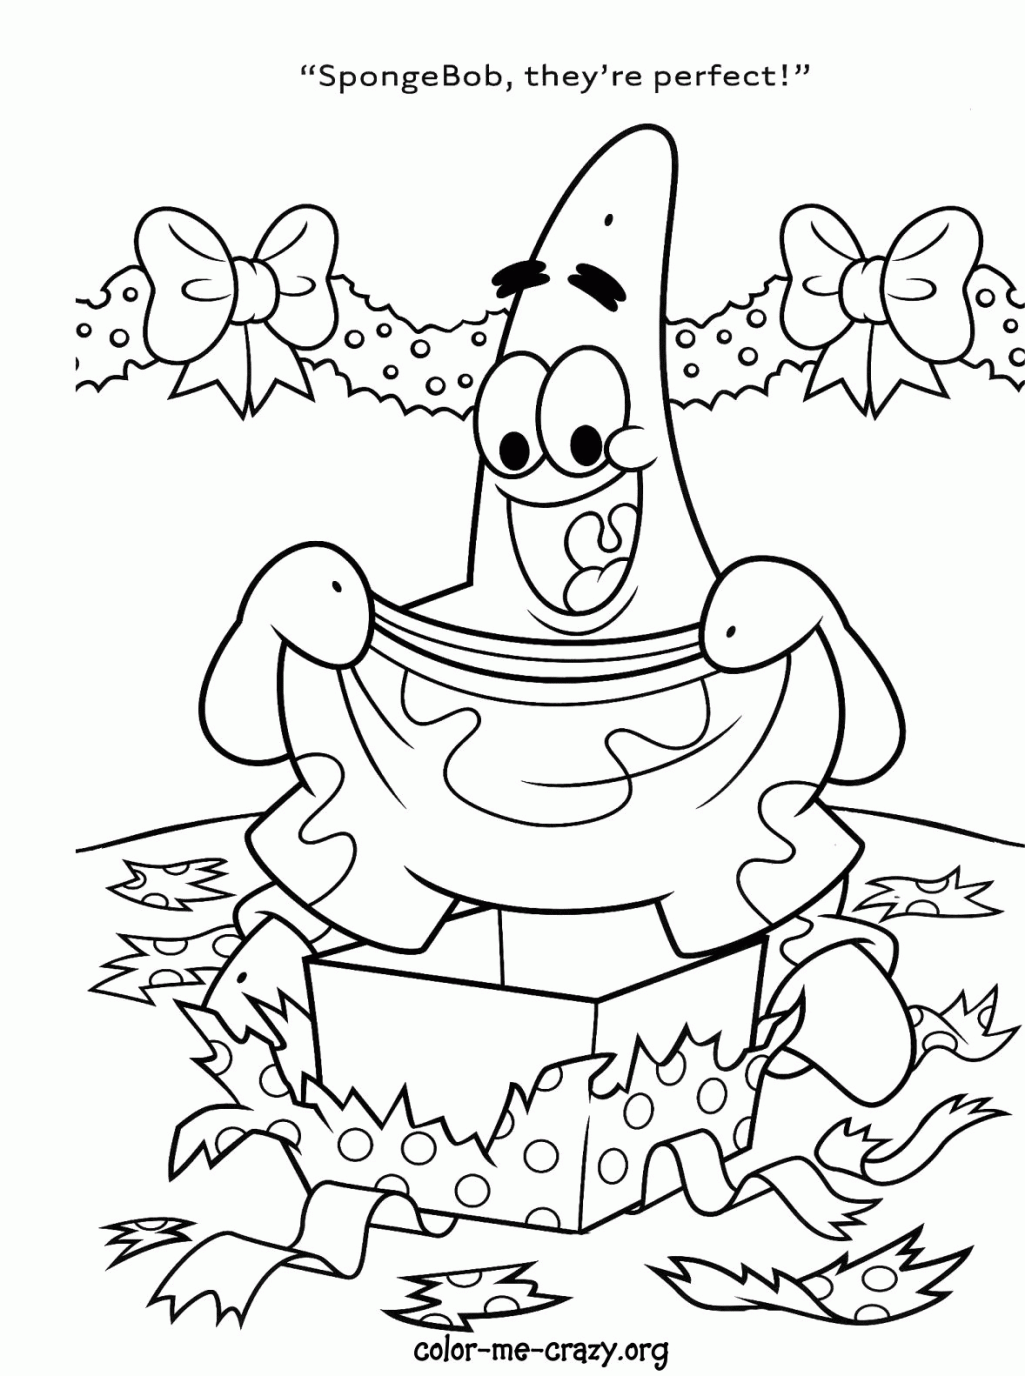 Free Printable Spongebob Christmas Coloring Pages - Coloring